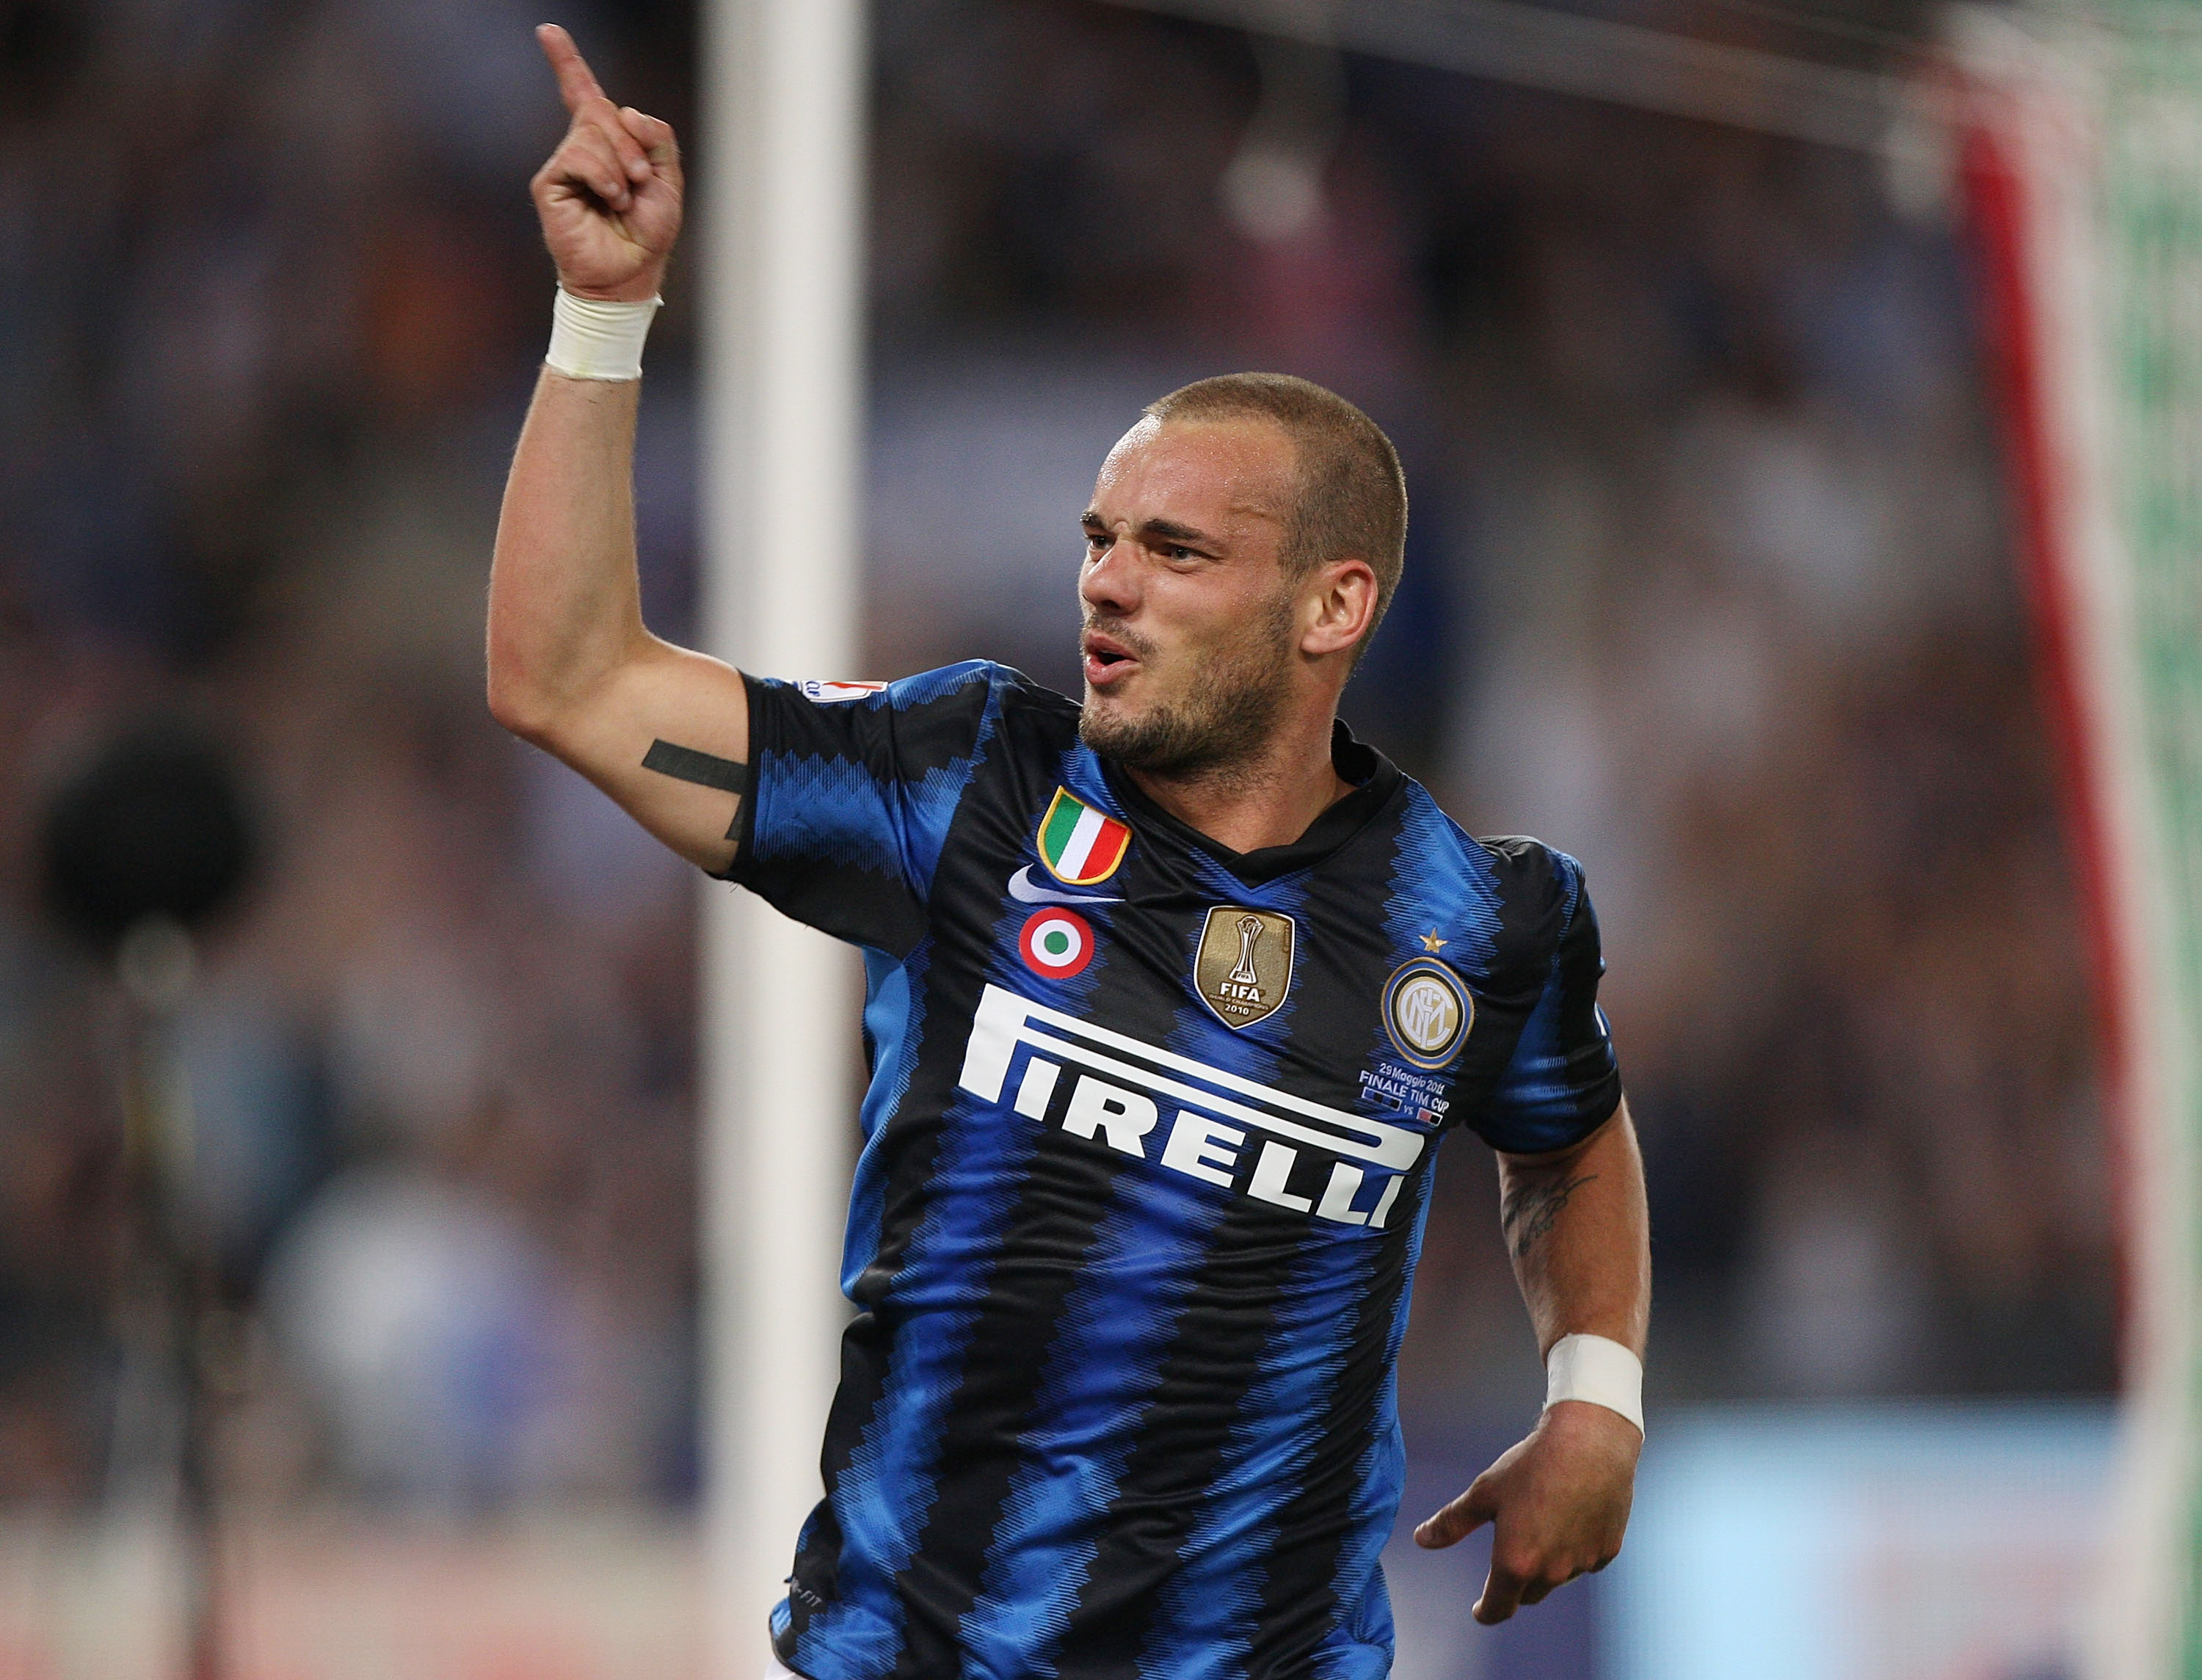 ROME, ITALY - MAY 29:  Wesley Sneijder of FC Internazionale Milano celebrates after the goal scored by Samuel Eto'o during the Tim Cup final between FC Internazionale Milano and US Citta di Palermo at Olimpico Stadium on May 29, 2011 in Rome, Italy.  (Pho